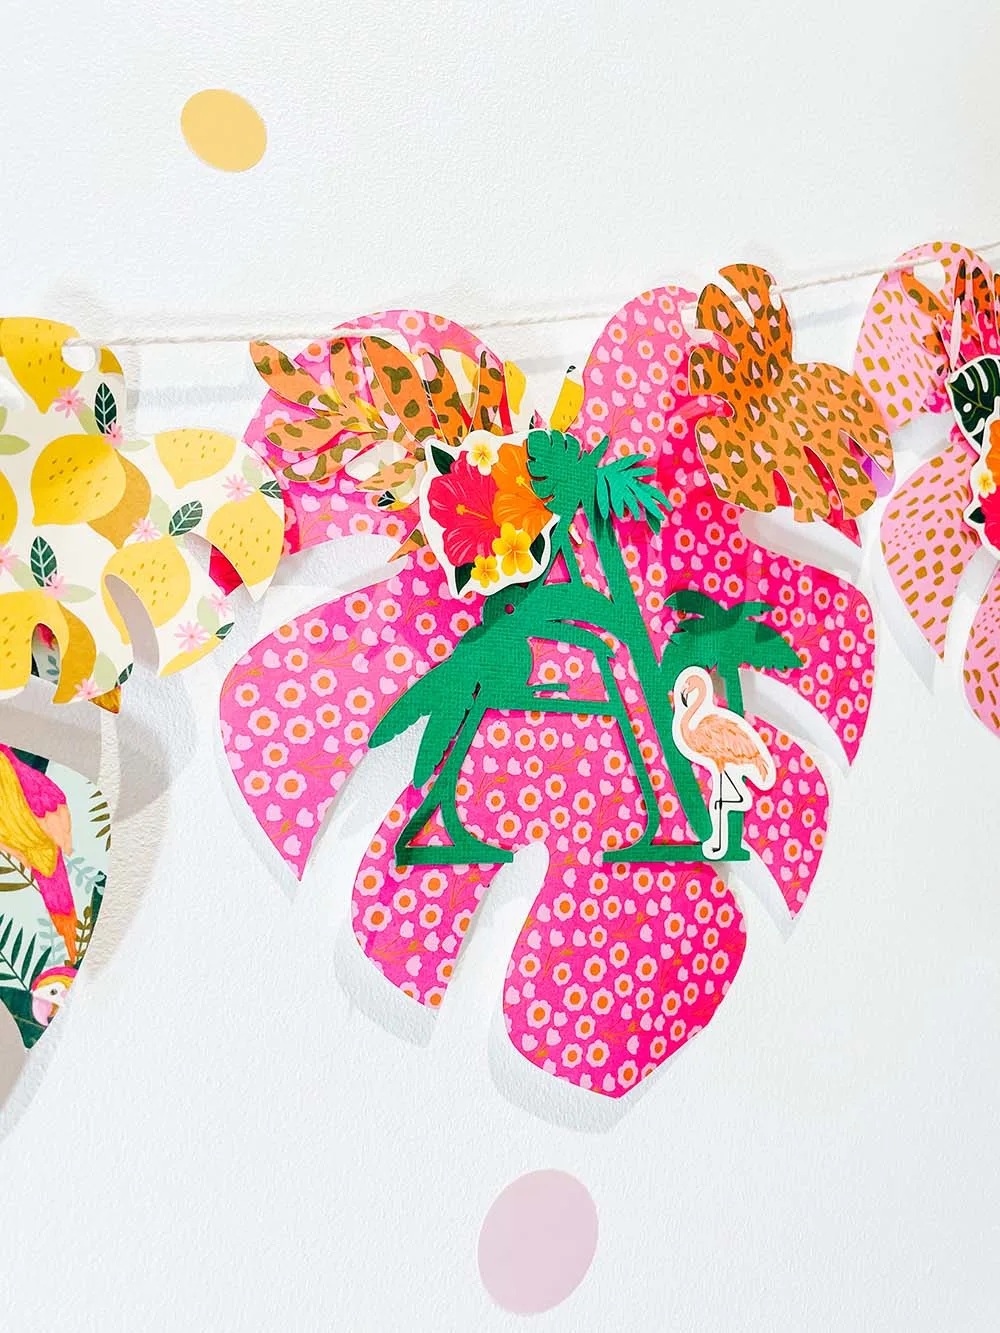 Tropical leaves with patterned paper hang as a banner on a white wall. The letter "A" is on the foremost paper leaf made of palm trees and flamingos.